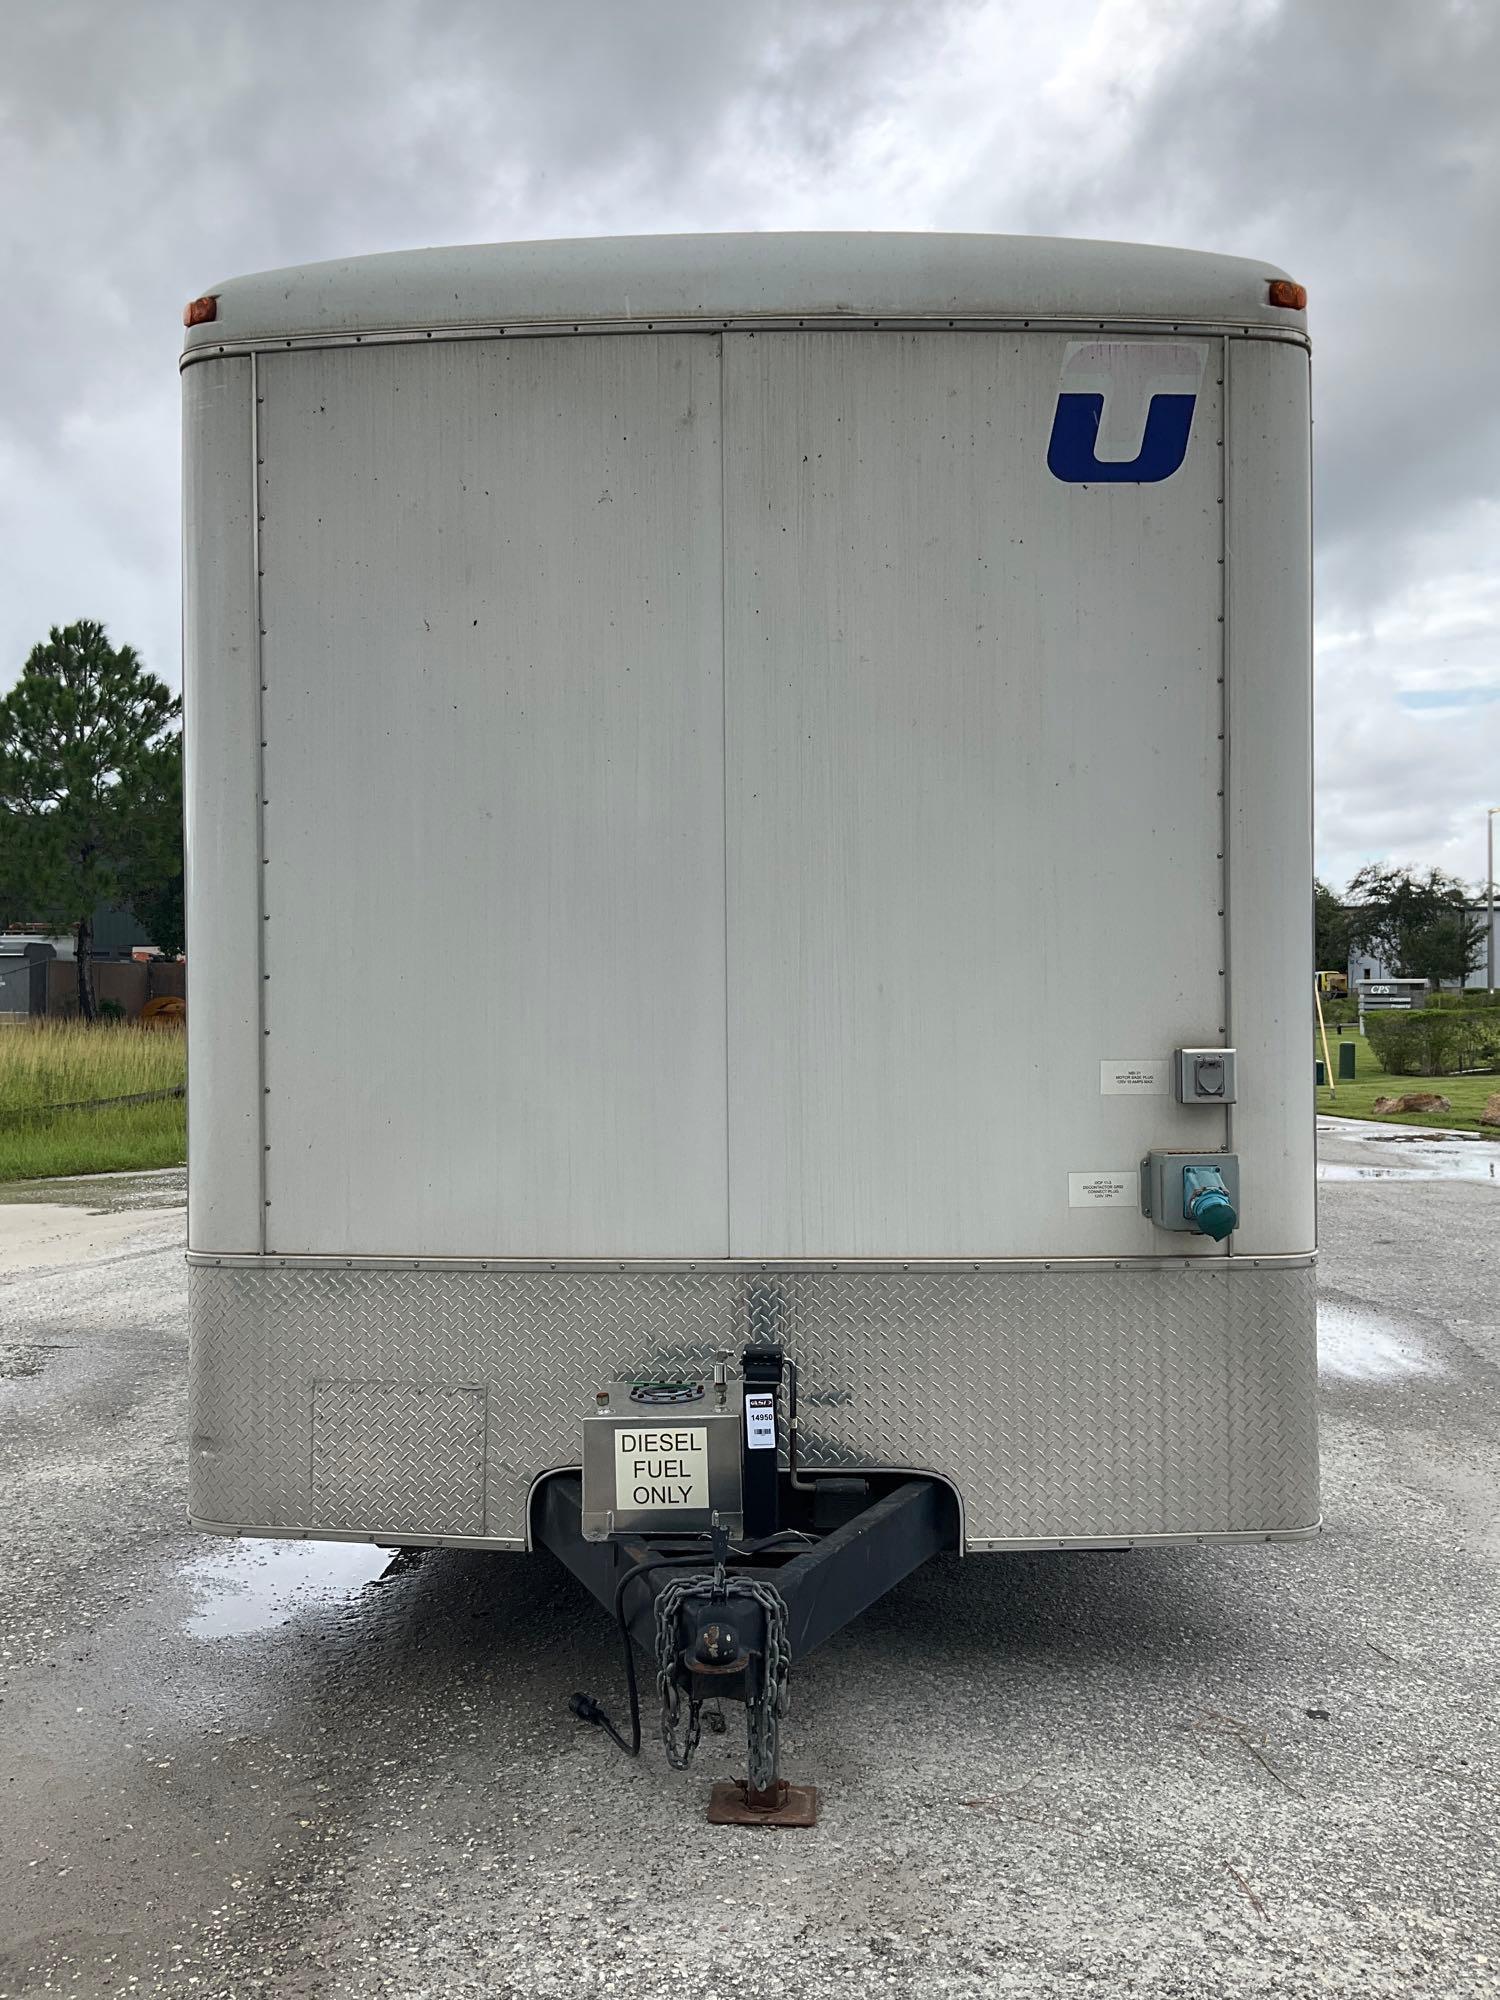 UNITED EXPRESS LINE ENCLOSED TRAILER, BOX APPROX 20FT LONG